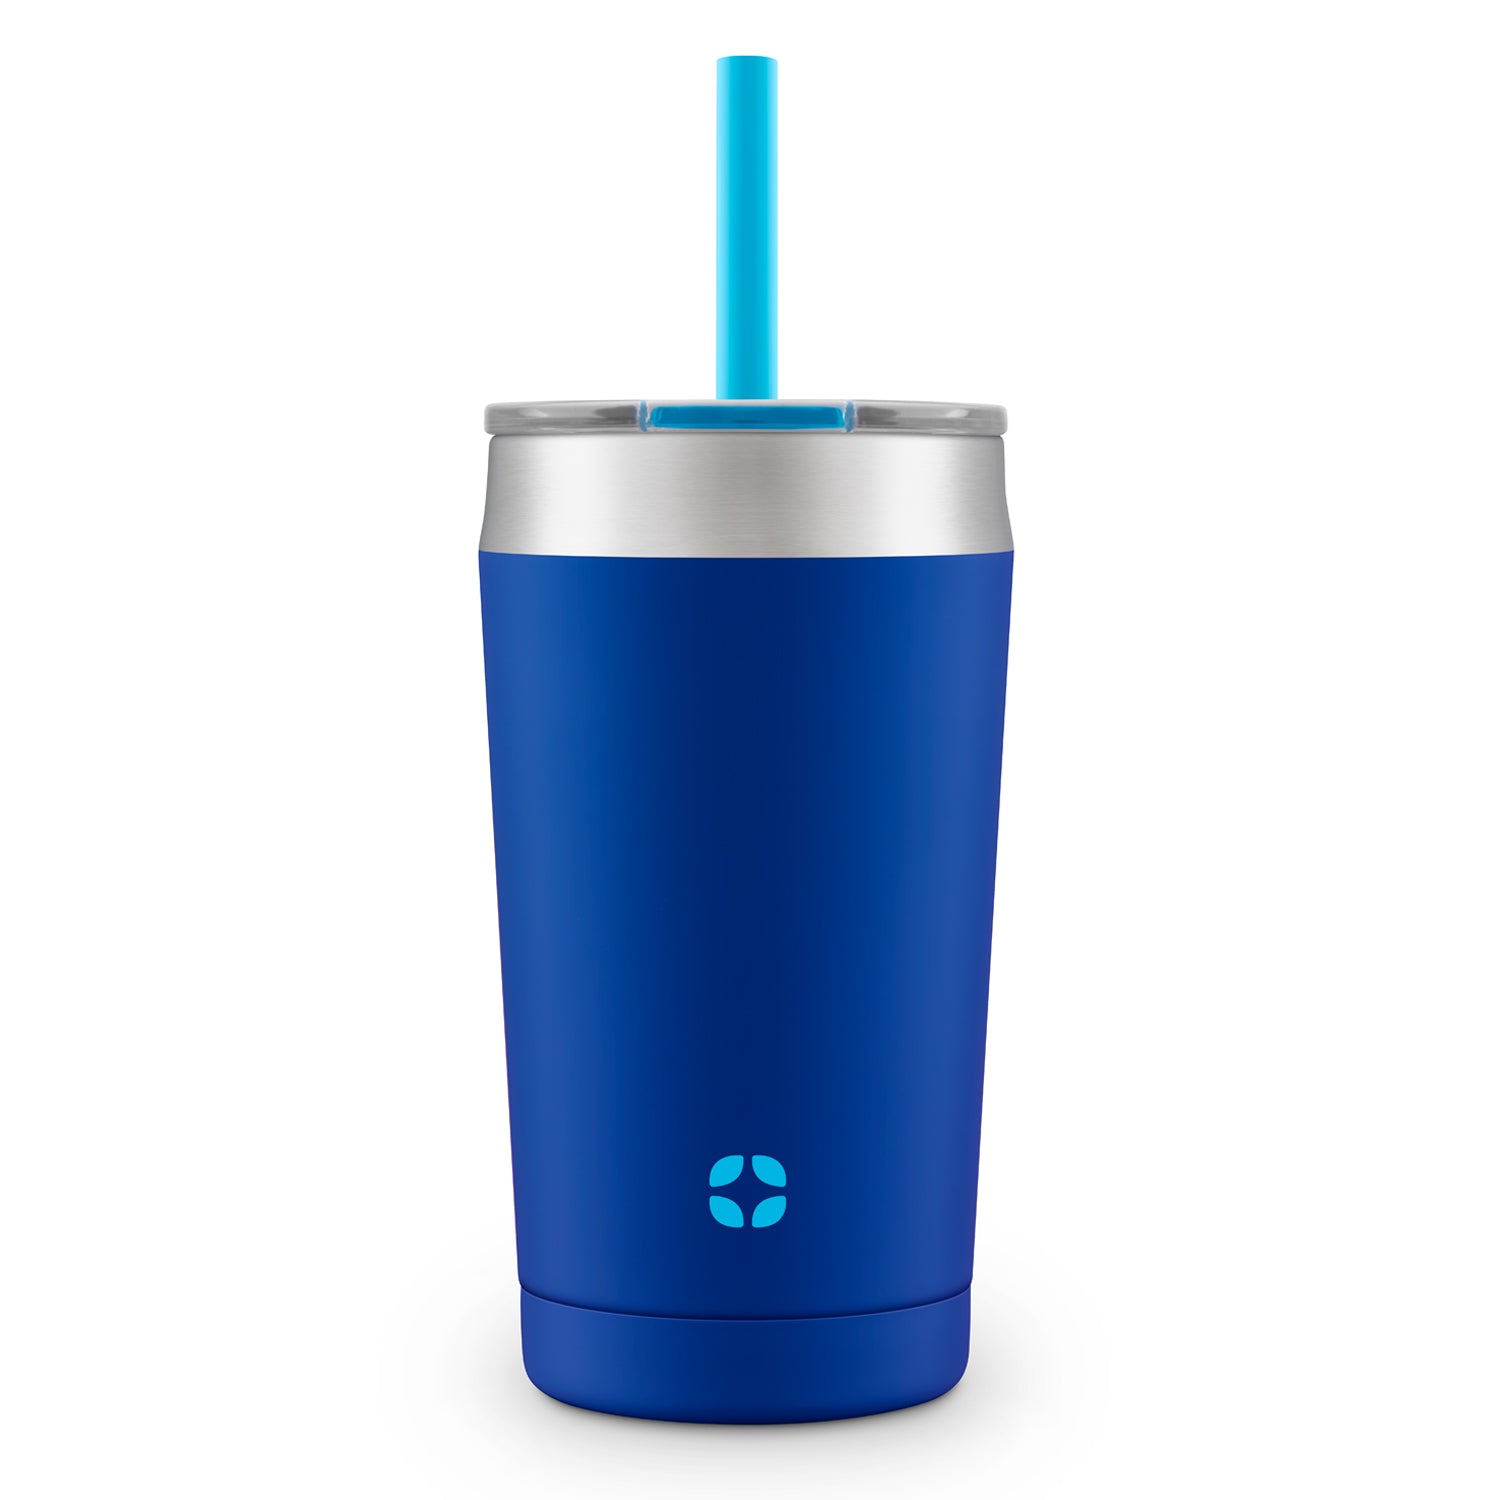 Enjoy the Little Things Water Tumbler with Straw – Studio Oh!